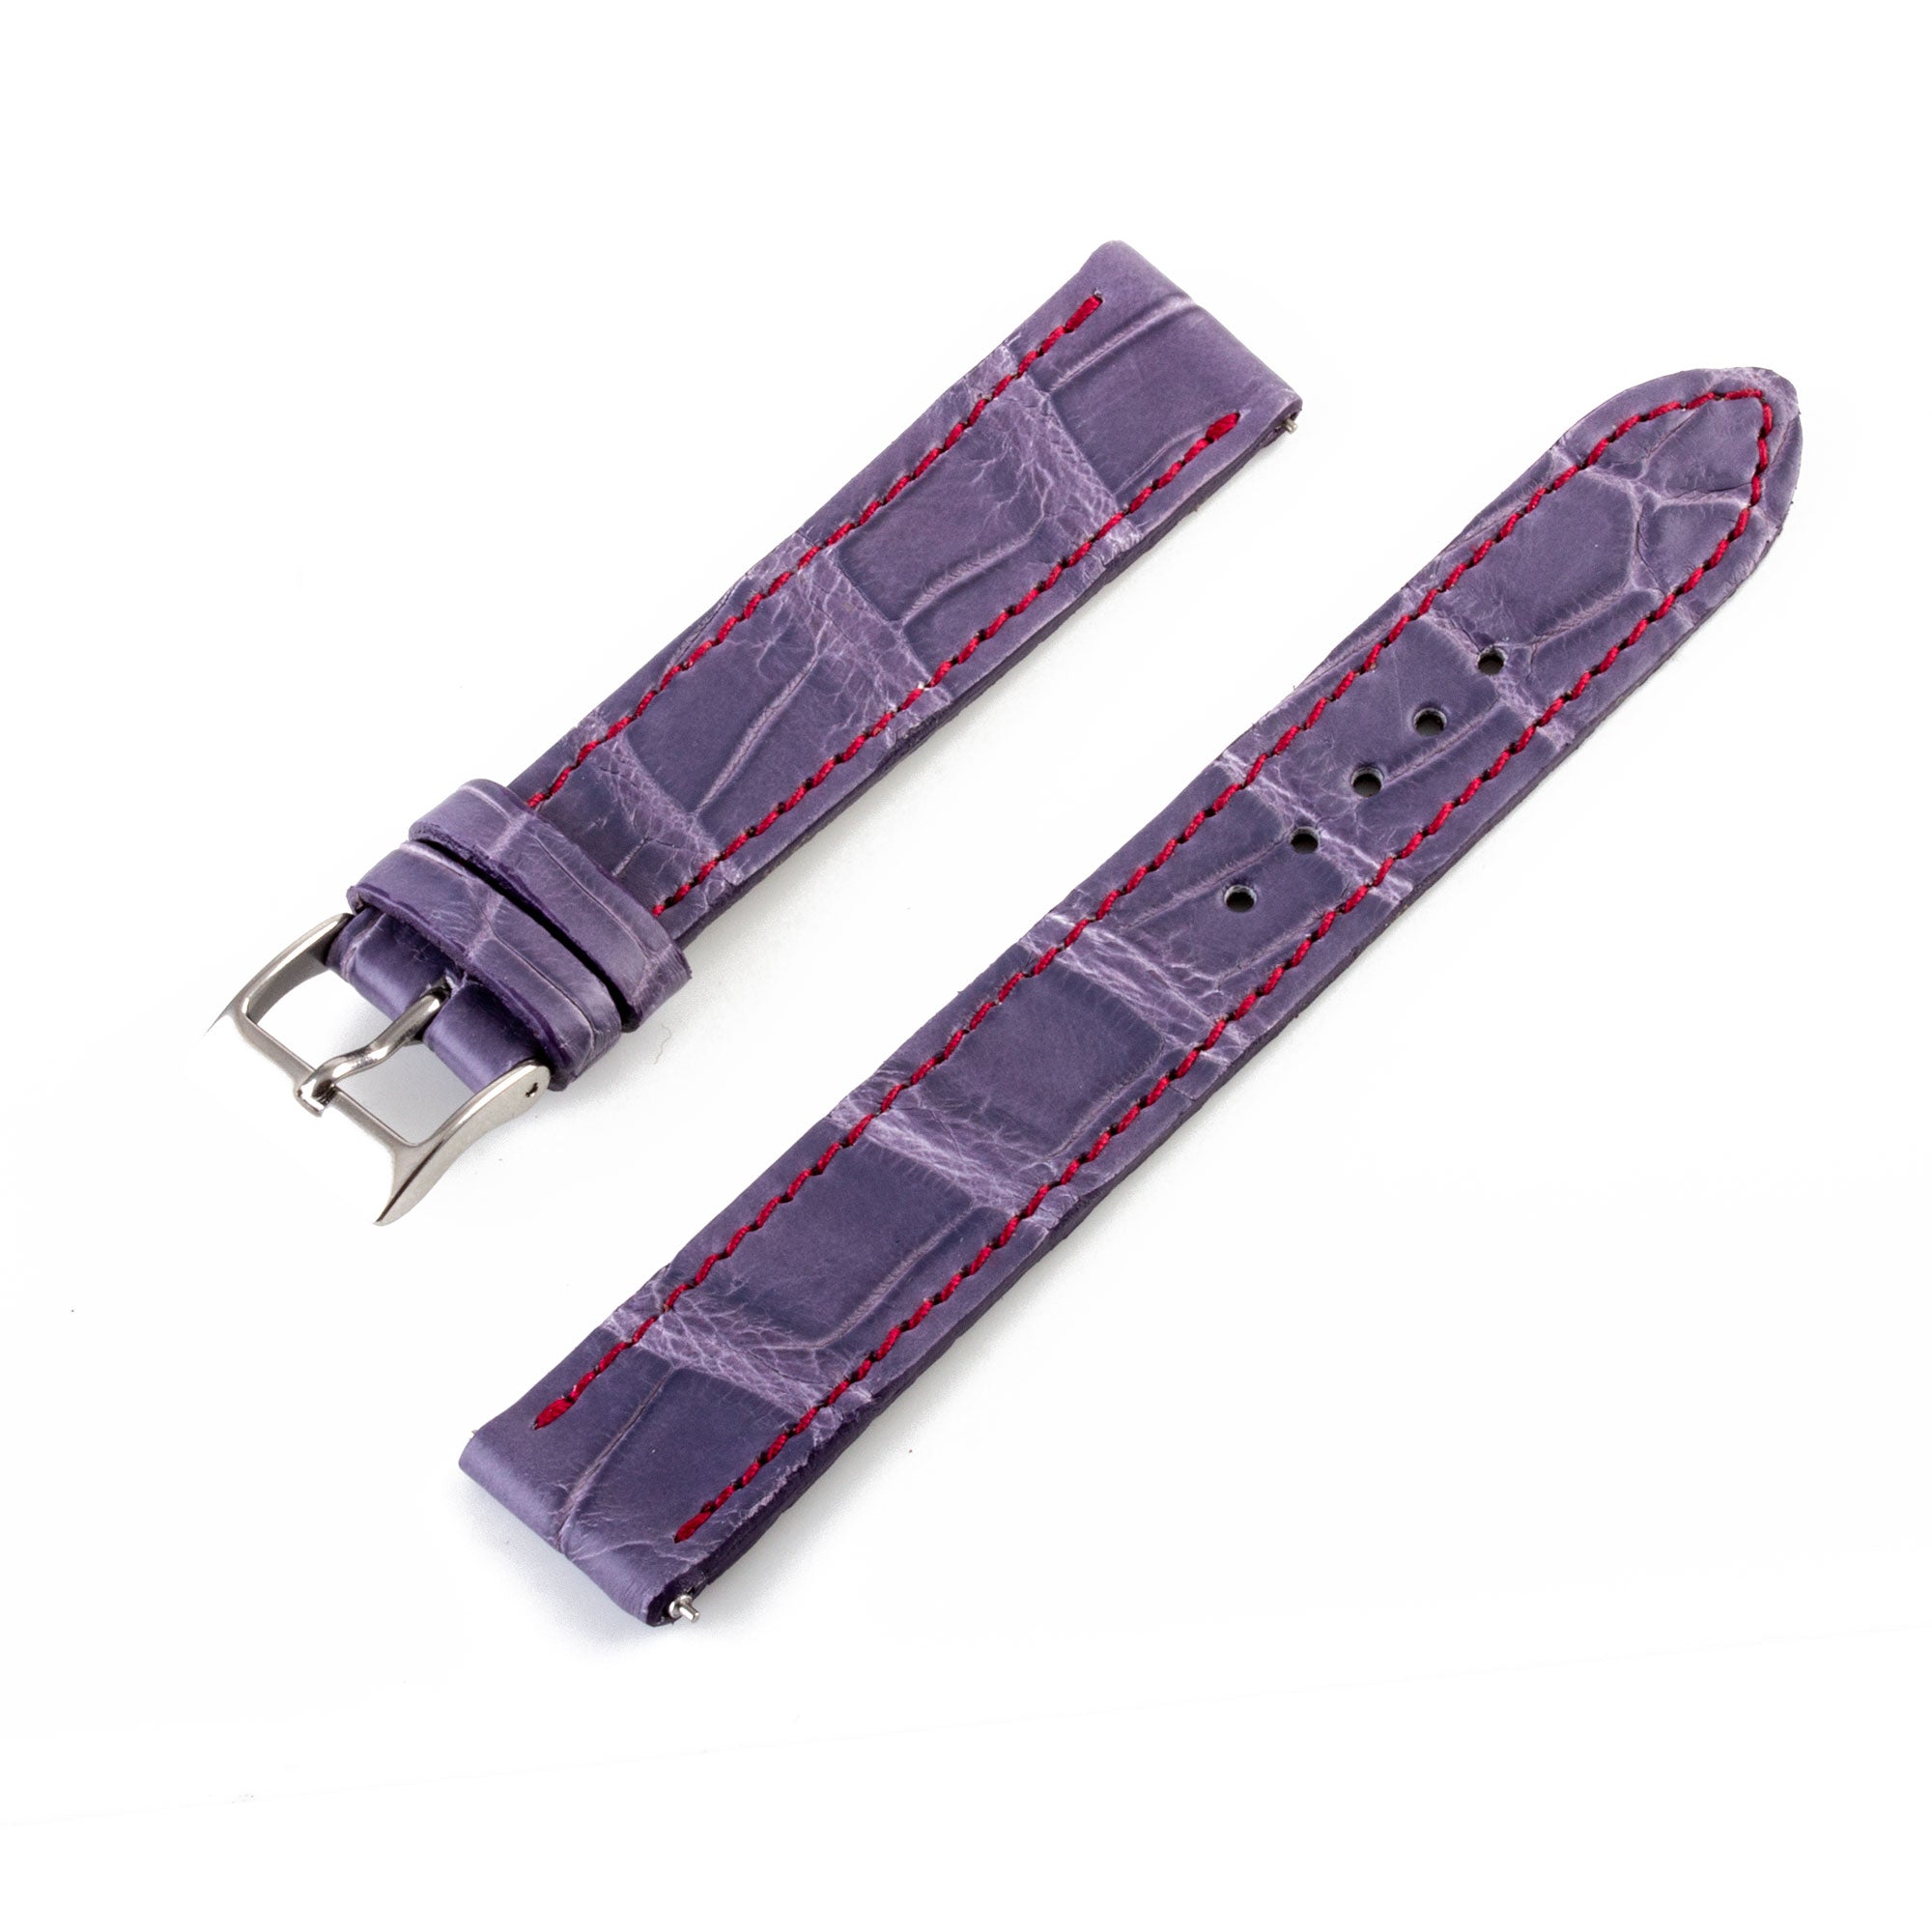 Alligator "Solo" leather watch band - 17mm width (0.67 inches) / Size M (n° 5)